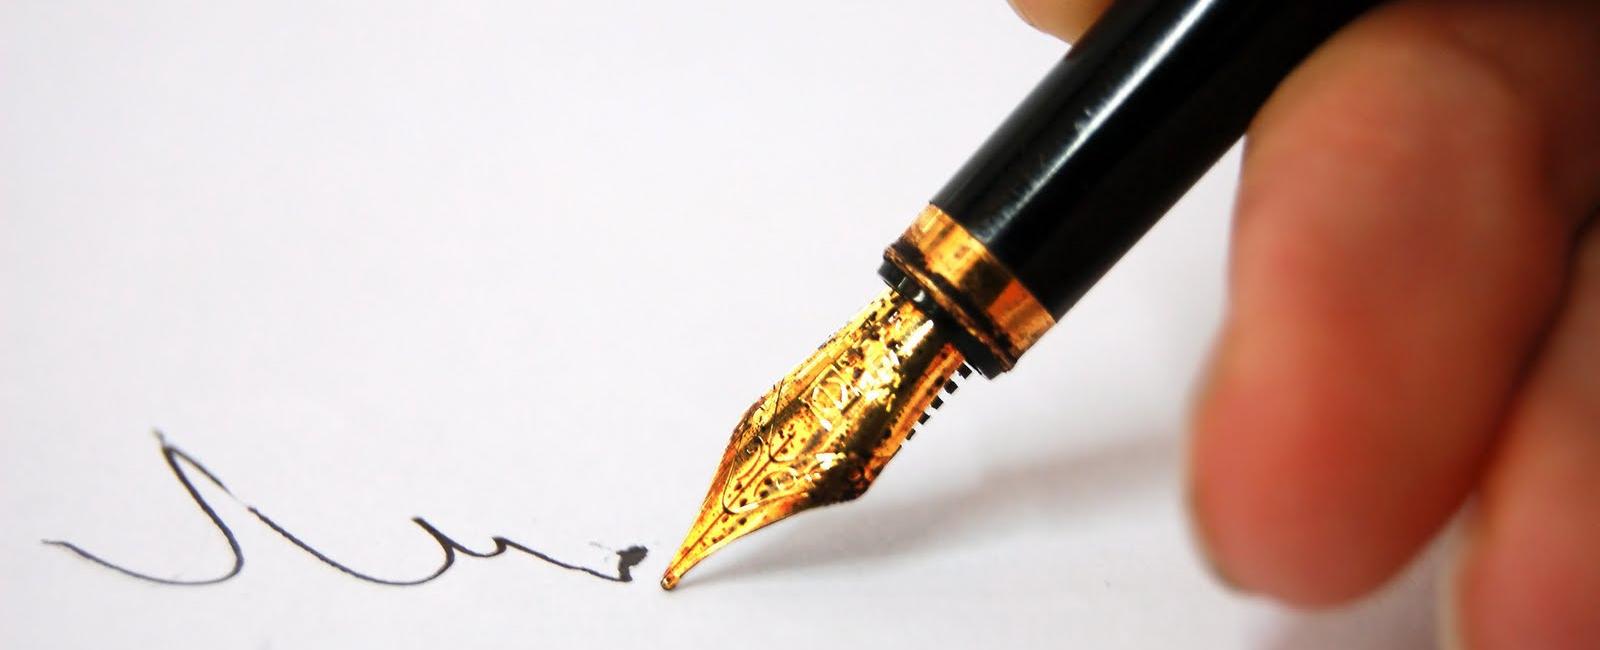 About 97 of people write their own name when given a new pen